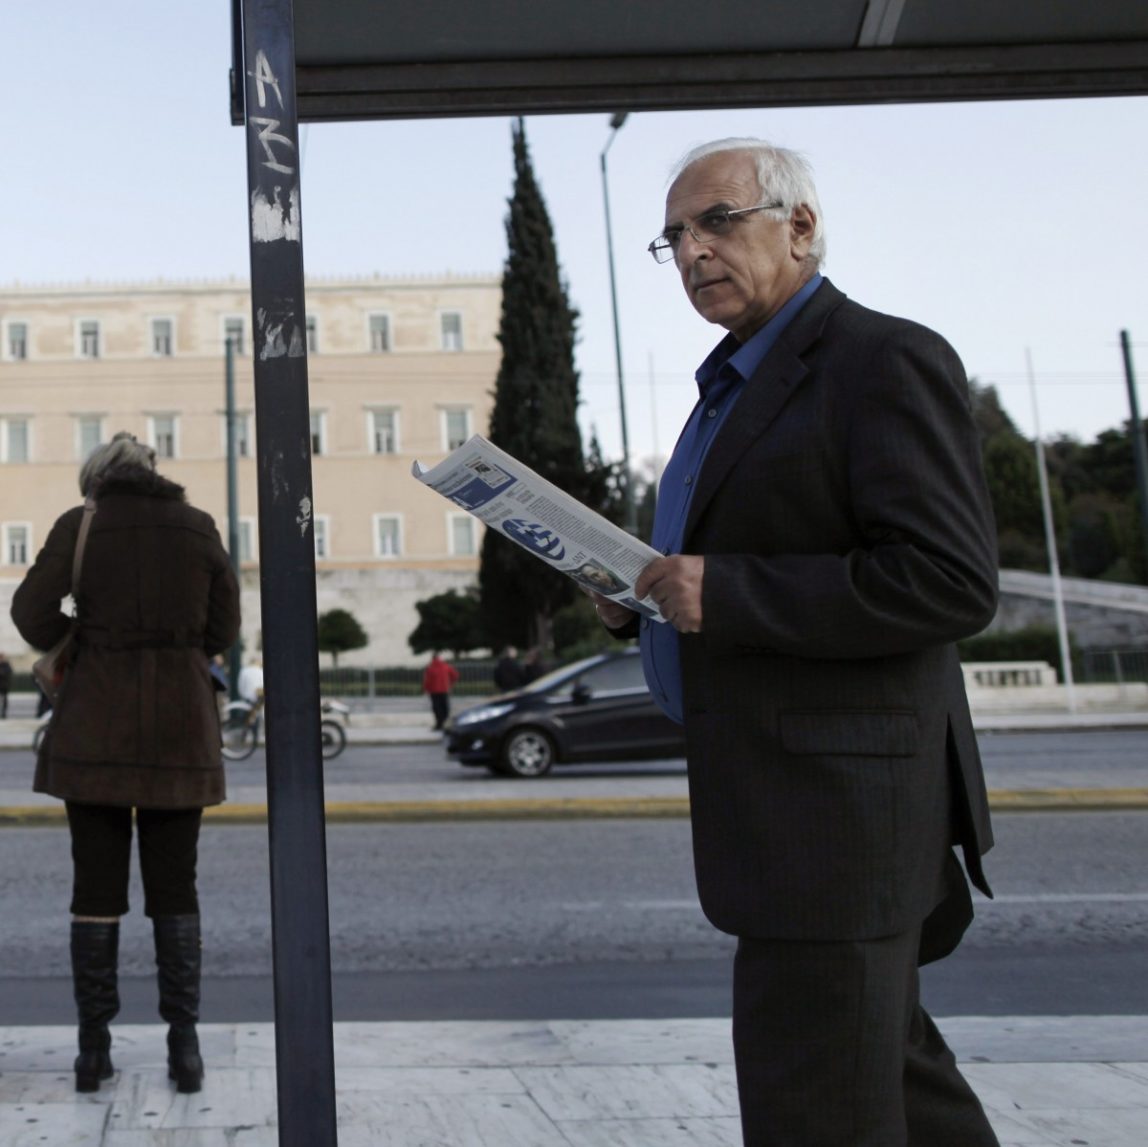 A man reads a newspaper as he walks past a bus stop opposite the Parliament in central Athens, Tuesday, Nov. 27, 2012. (AP Photo/Petros Giannakouris)